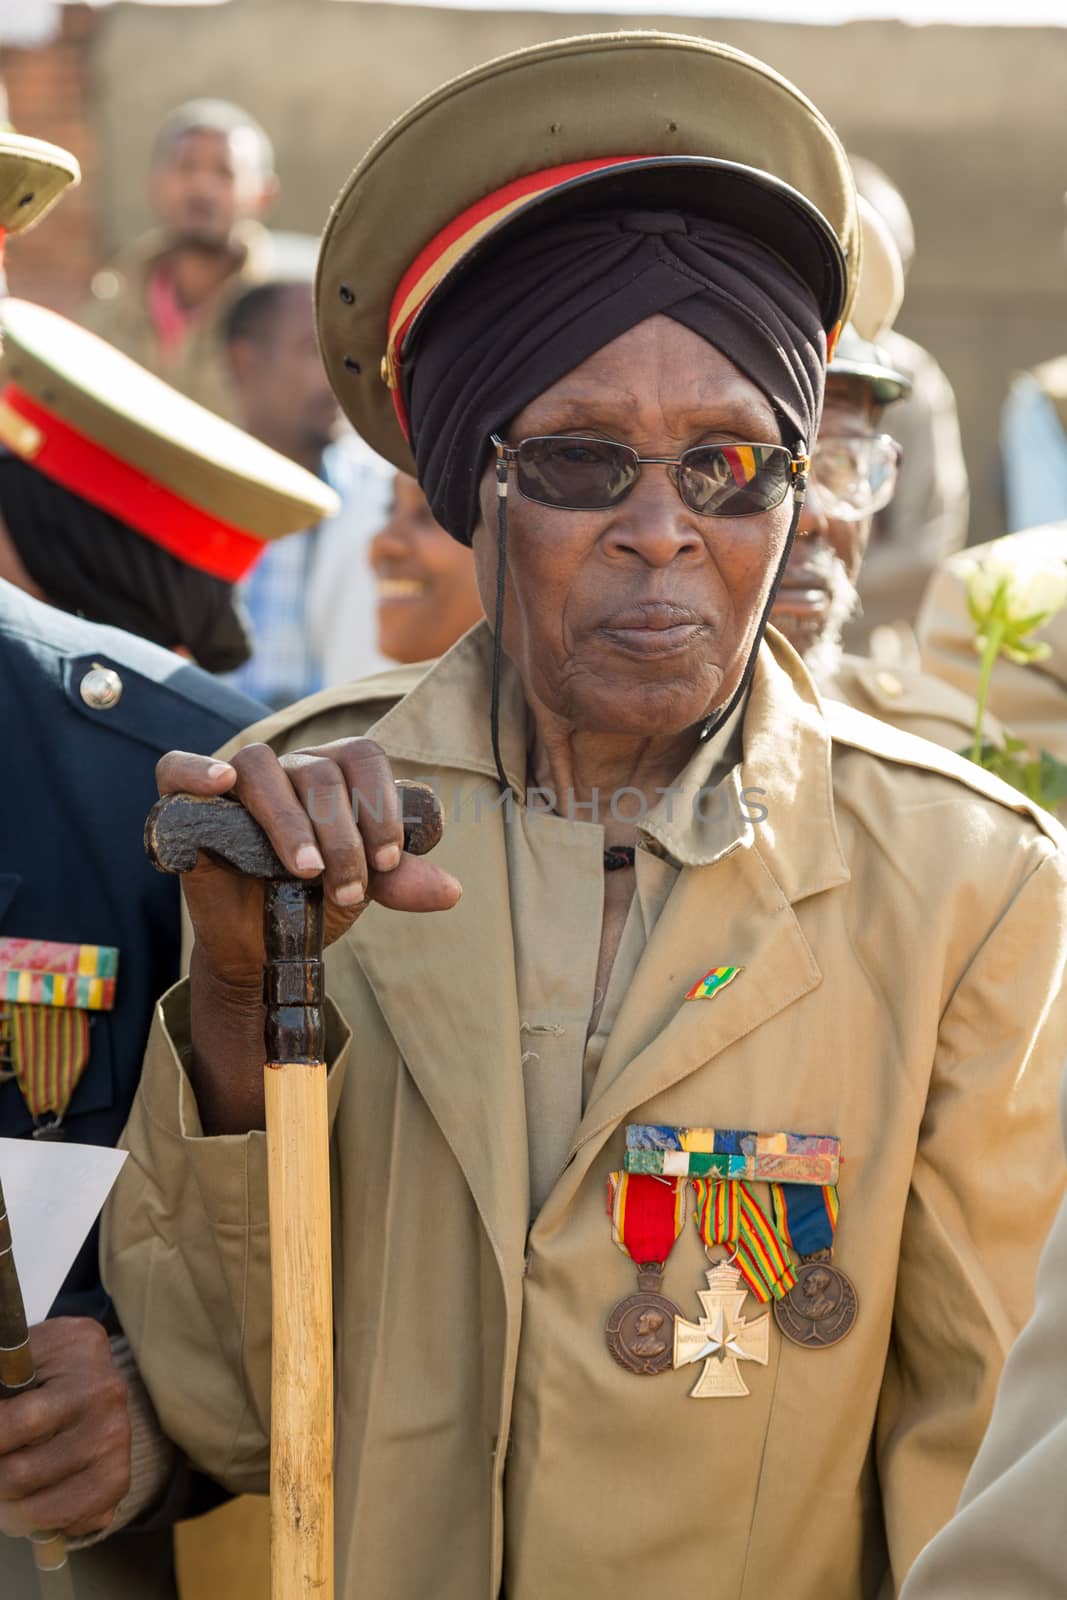 Addis Ababa - Sept 2: A decorated war veteran attends the celebrations of the 119th Anniversary of the Ethiopian Armys victory over the invading Italian forces in the 1896 battle of Adwa. September 2, 2015, Addis Ababa, Ethiopia.